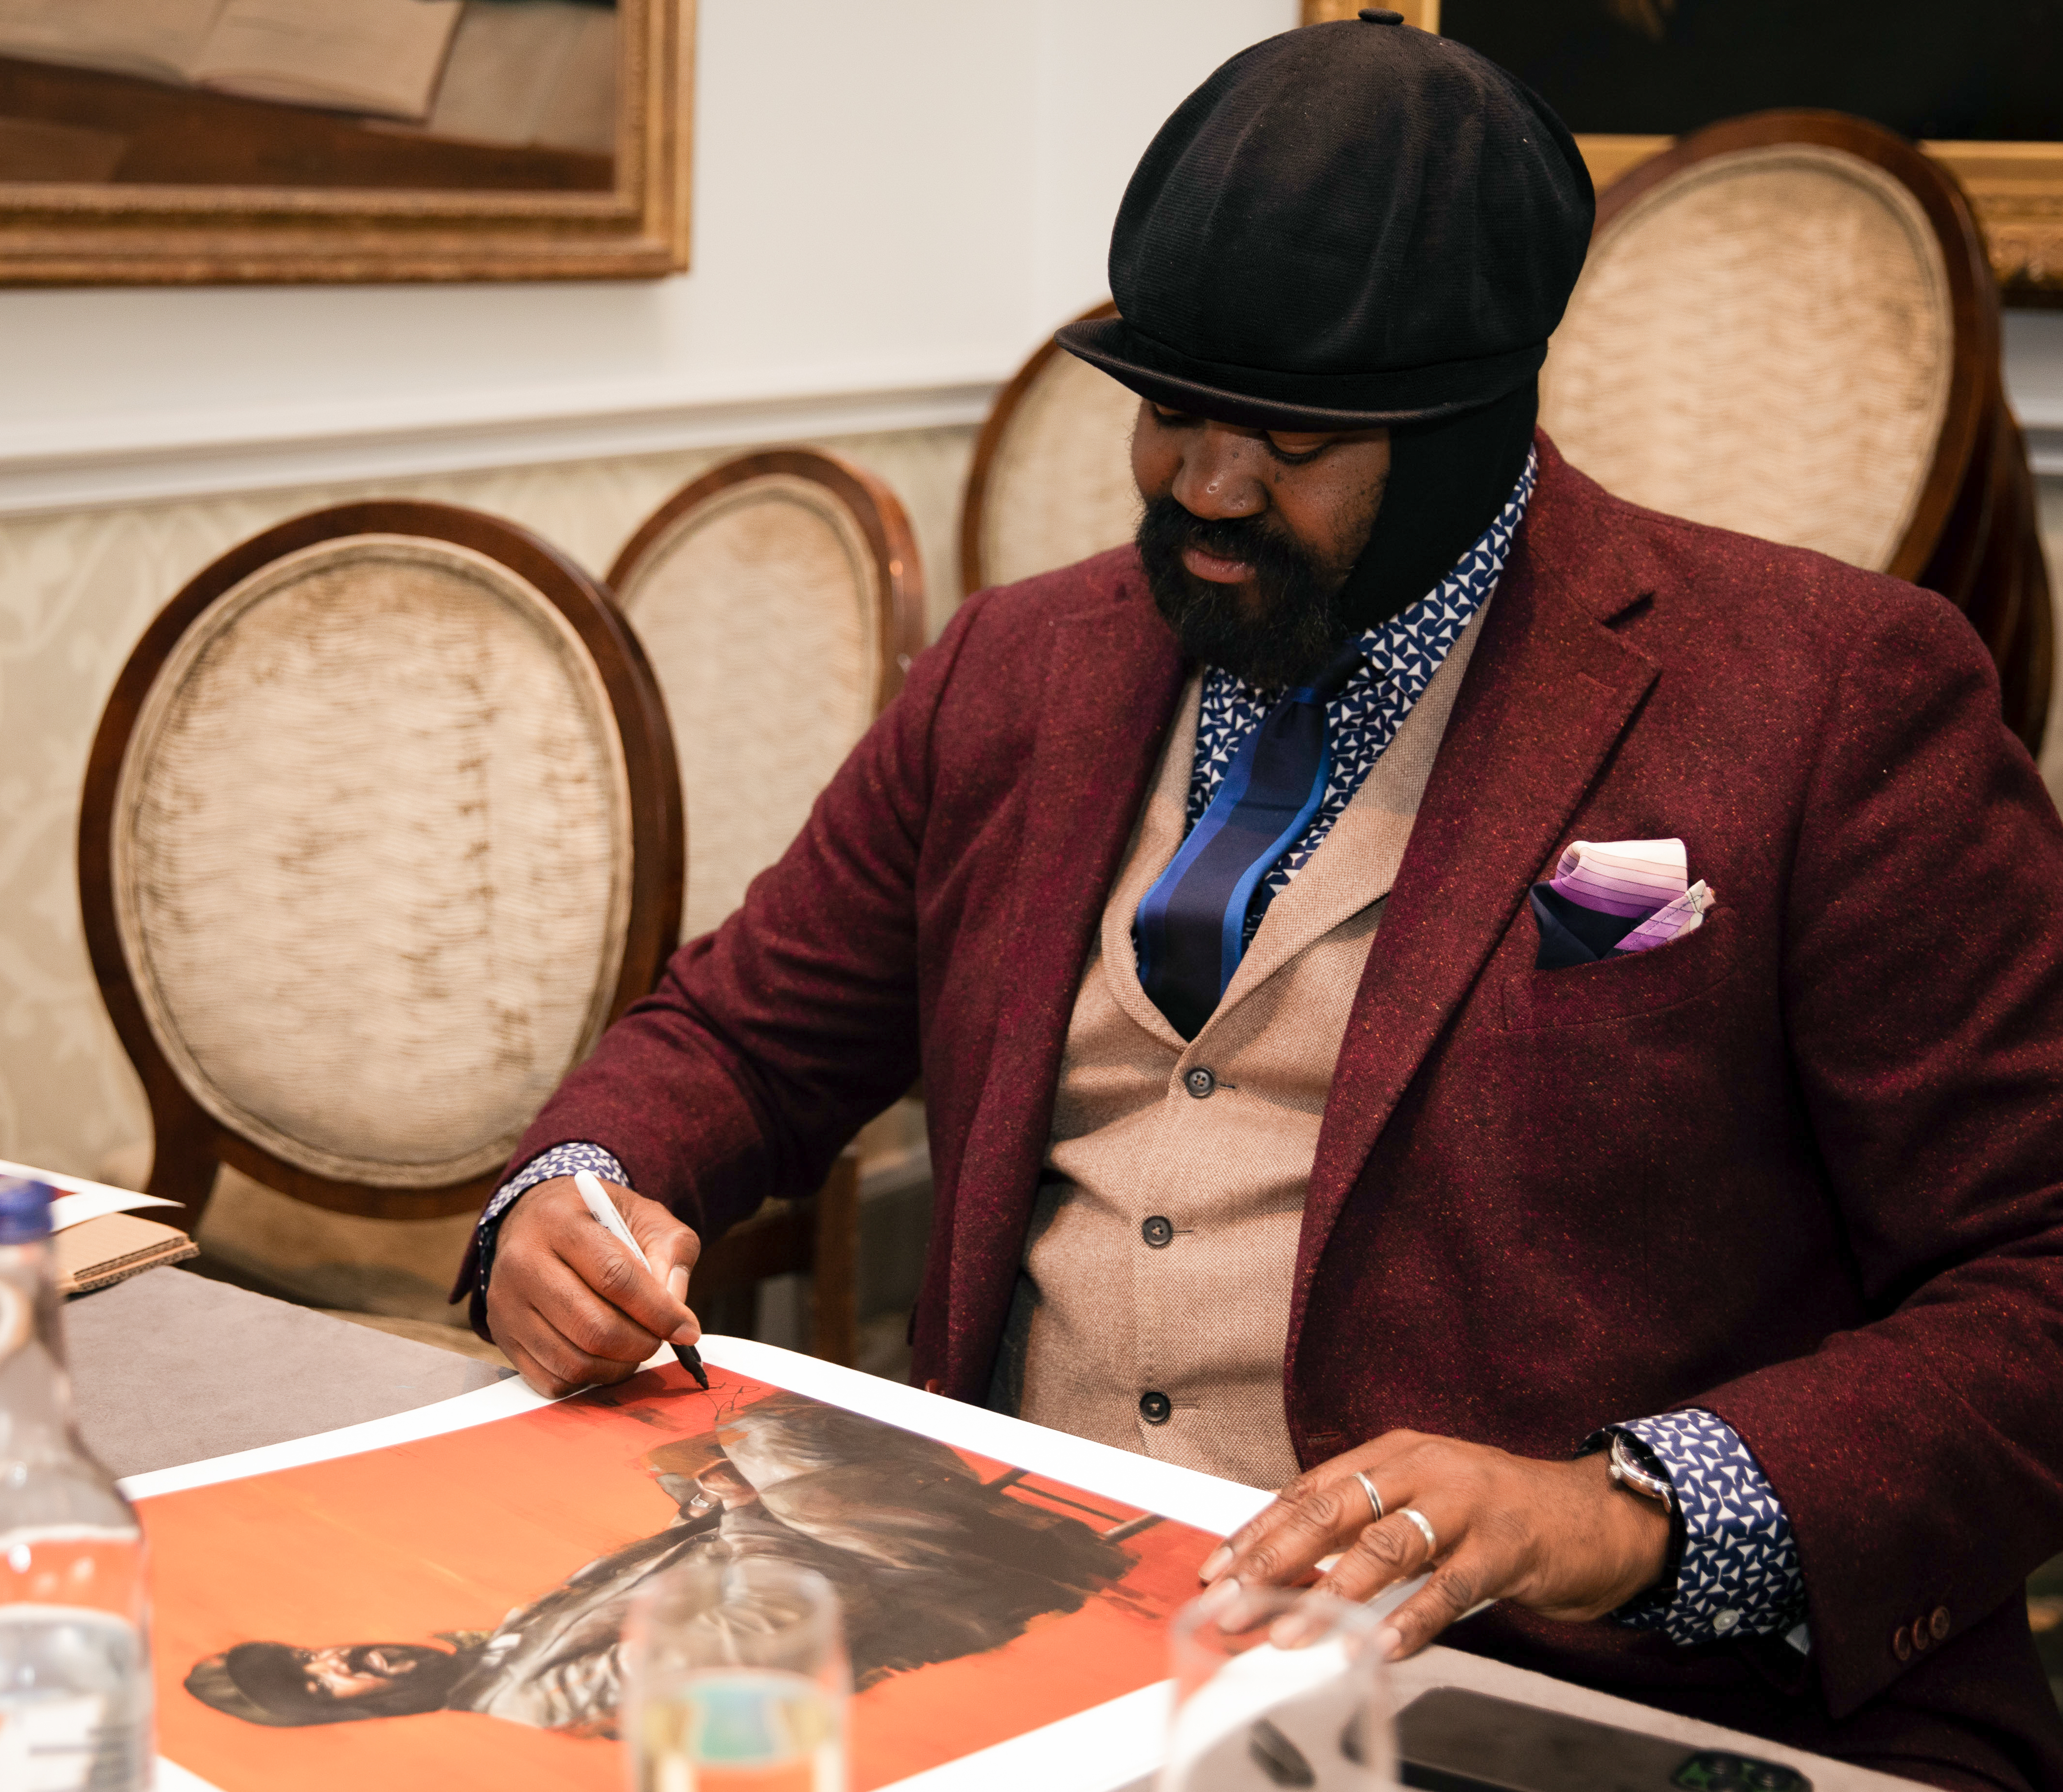 Gregory pictured signing this Limited Edition Print 